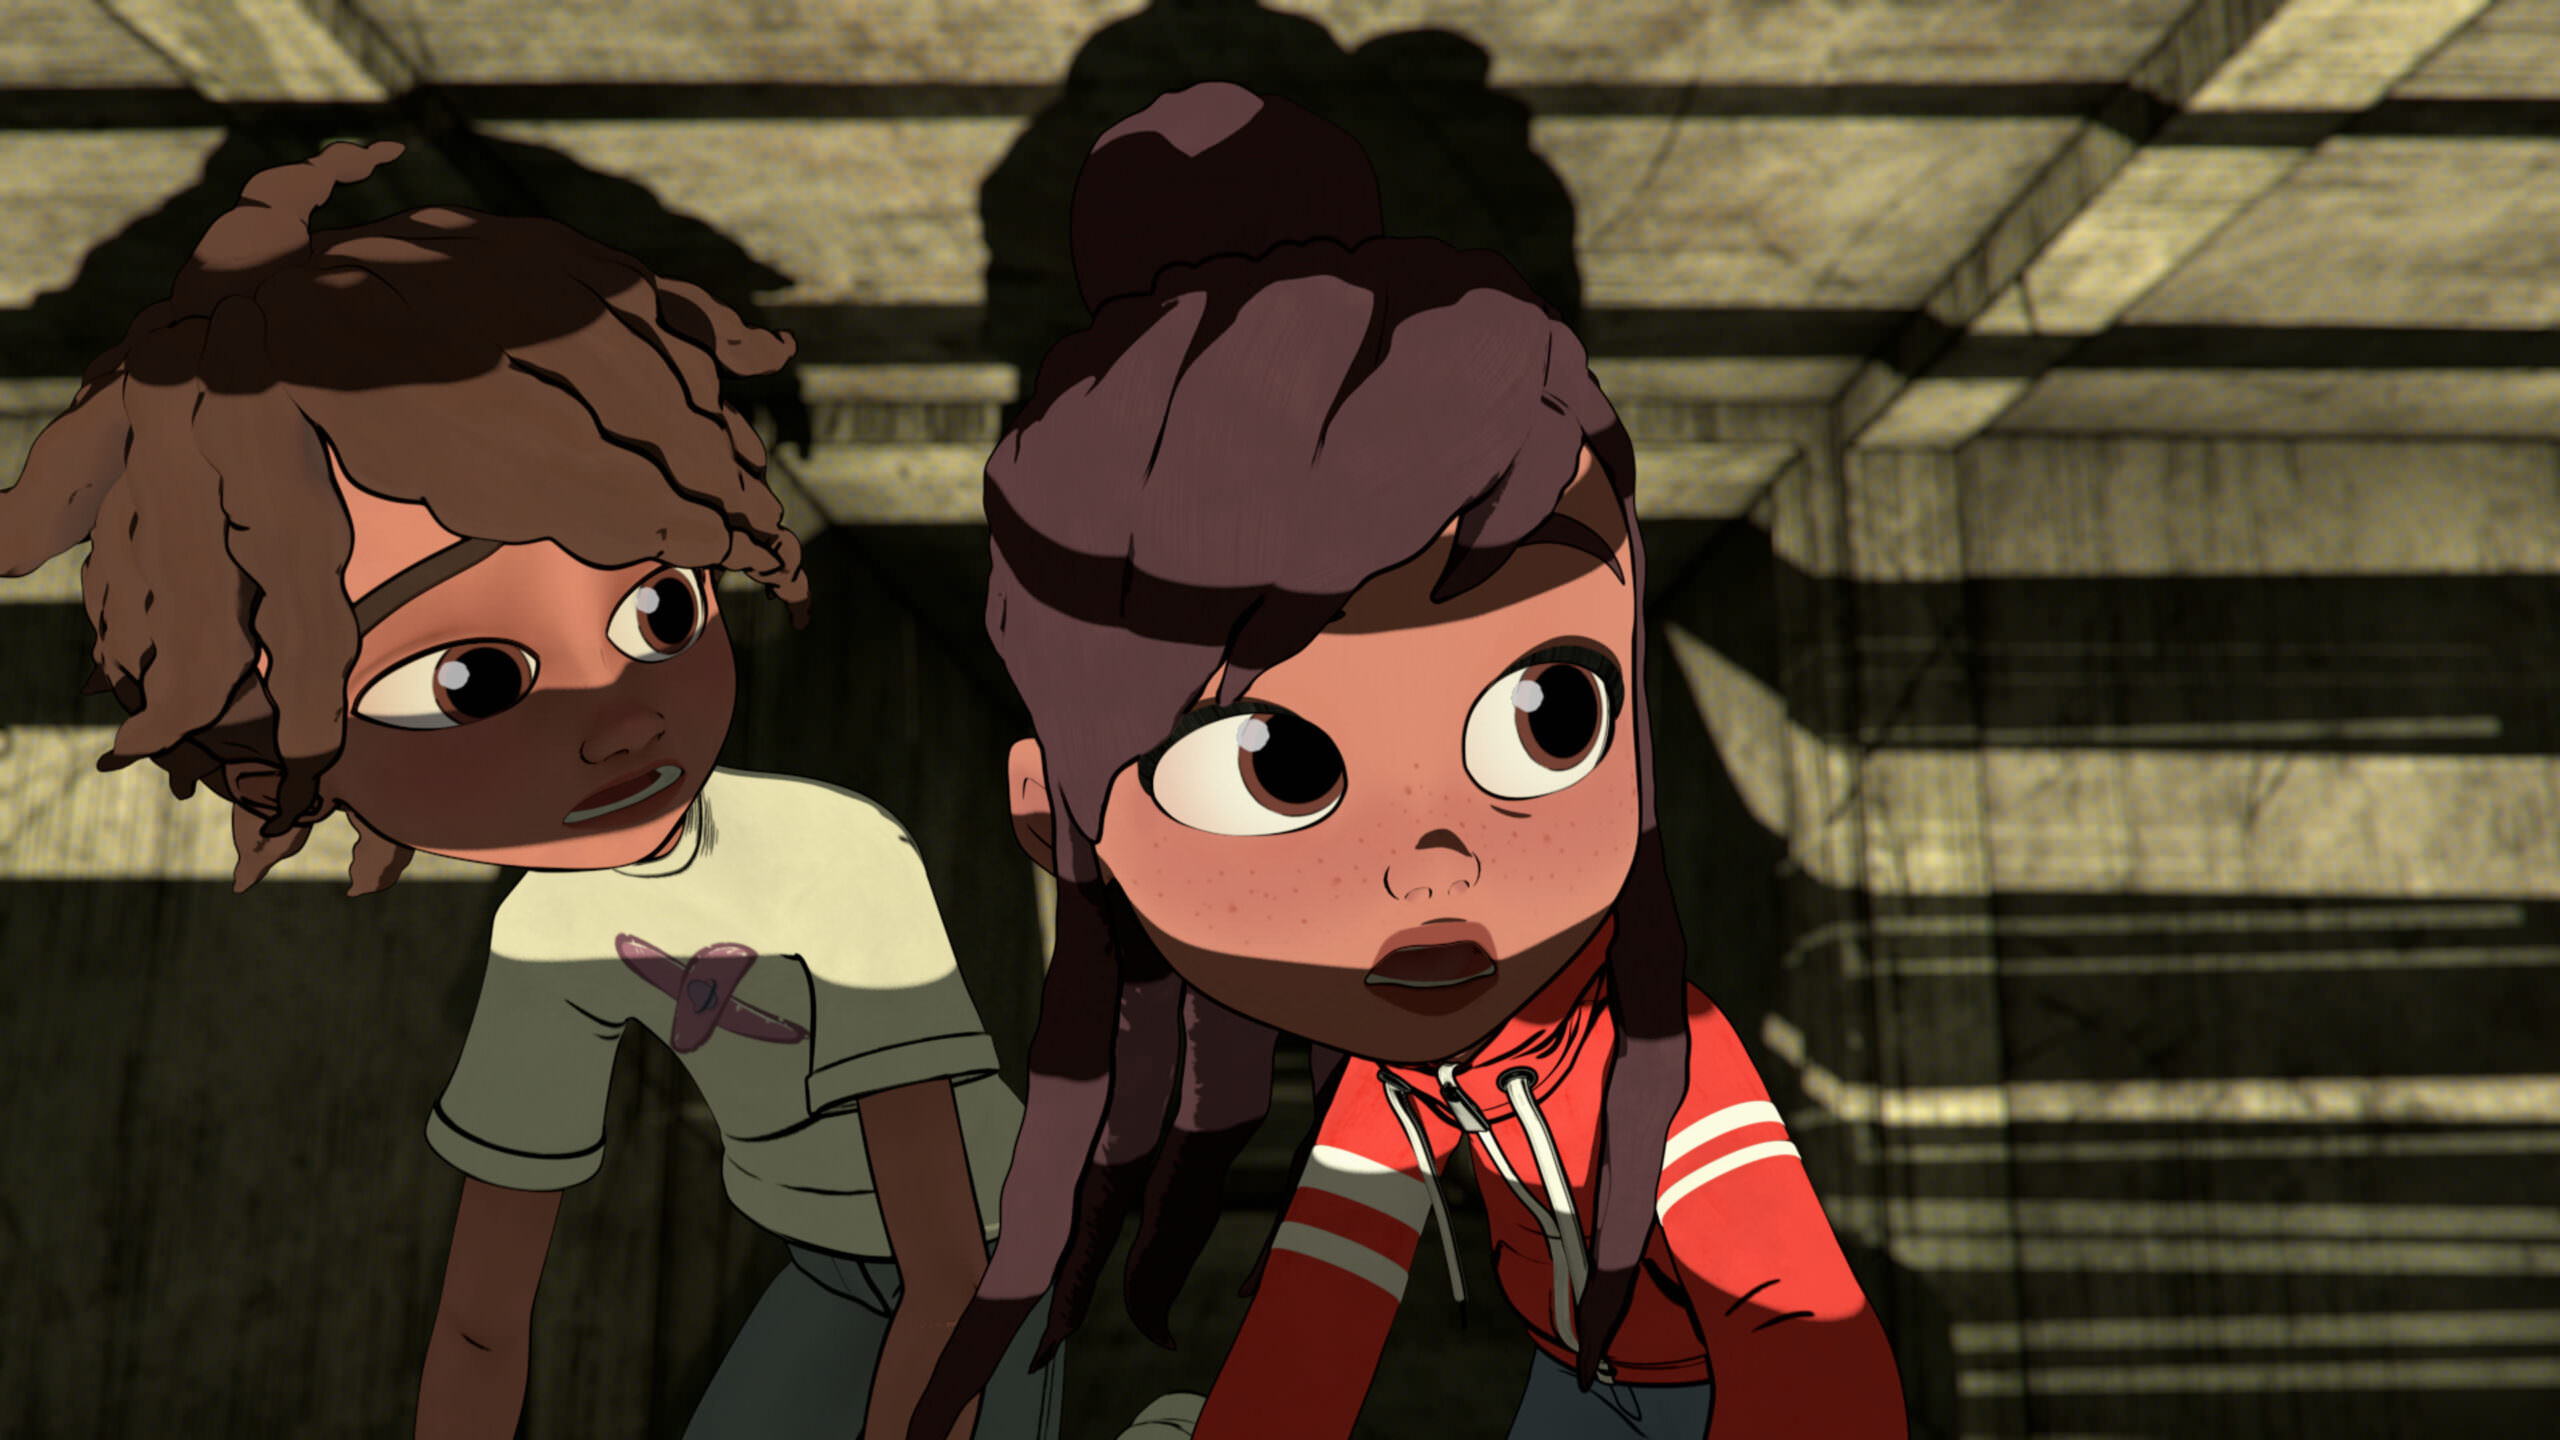 Russ (voiced by Andre Robinson) and Pandora (voiced by Gabrielle Nevaeh) in "CURSES!," now streaming on Apple TV+.